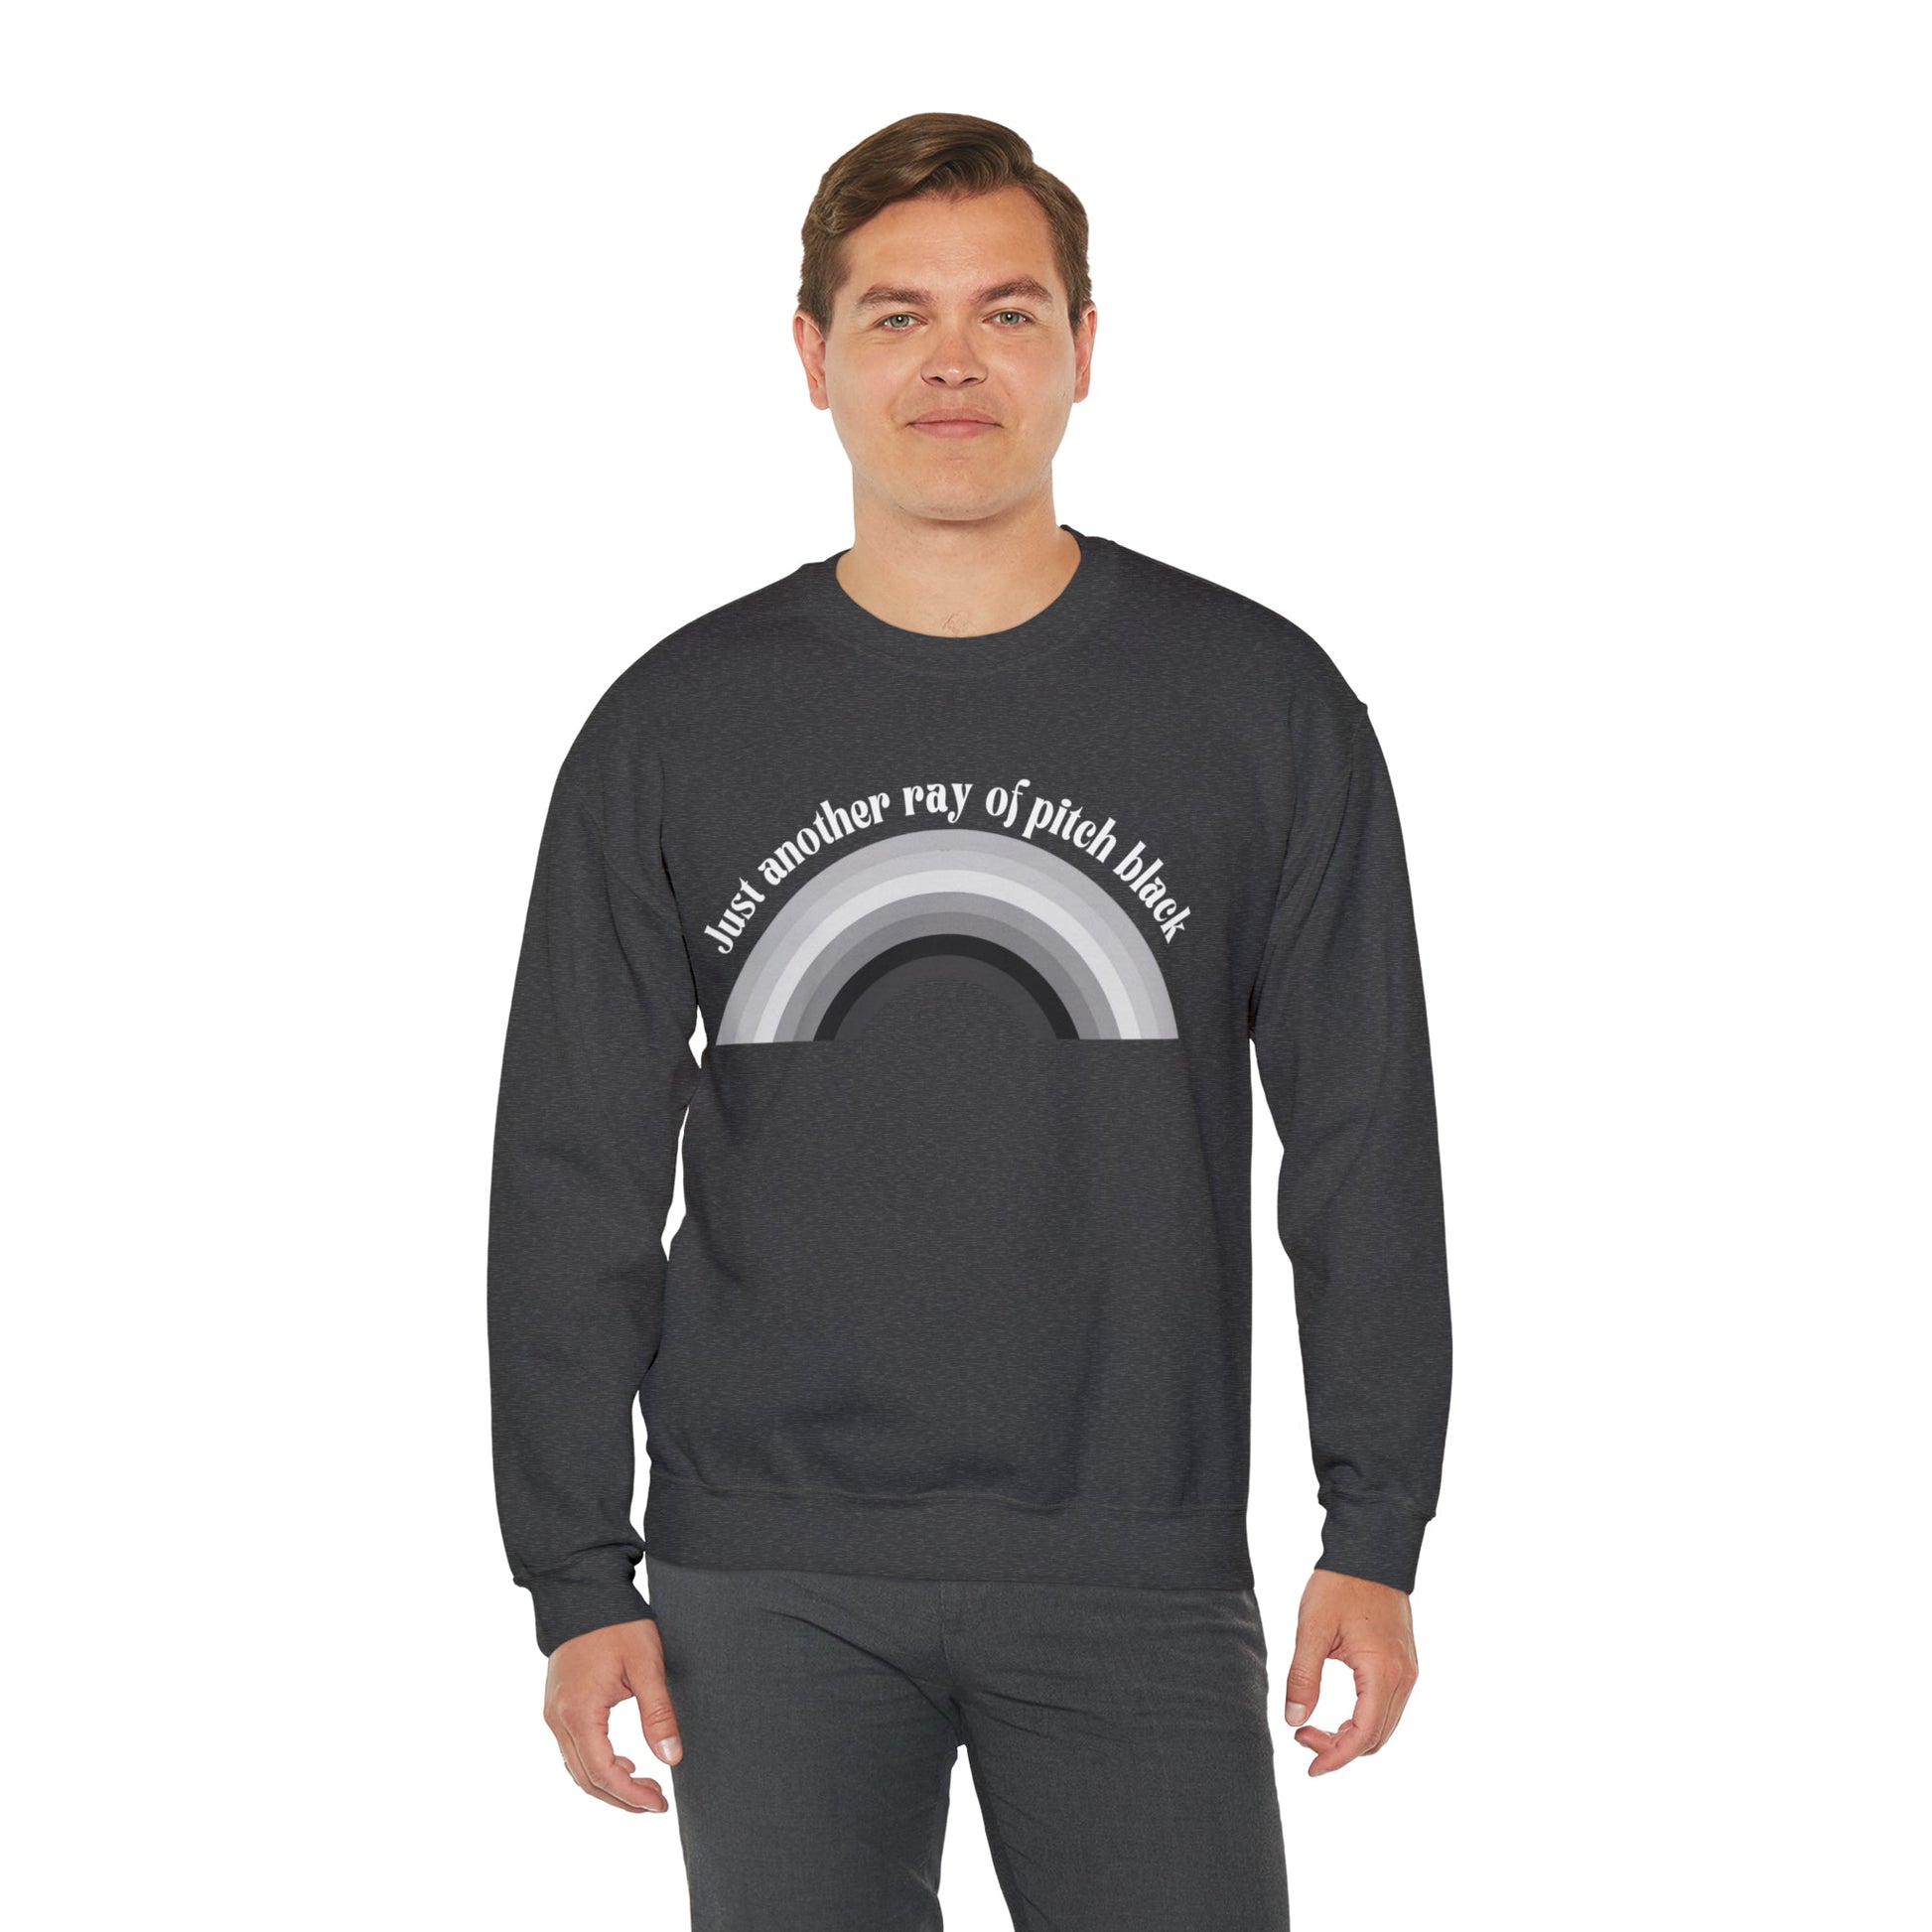 Just Another Ray of Pitch Black Unisex Heavy Blend™ Crewneck Sweatshirt